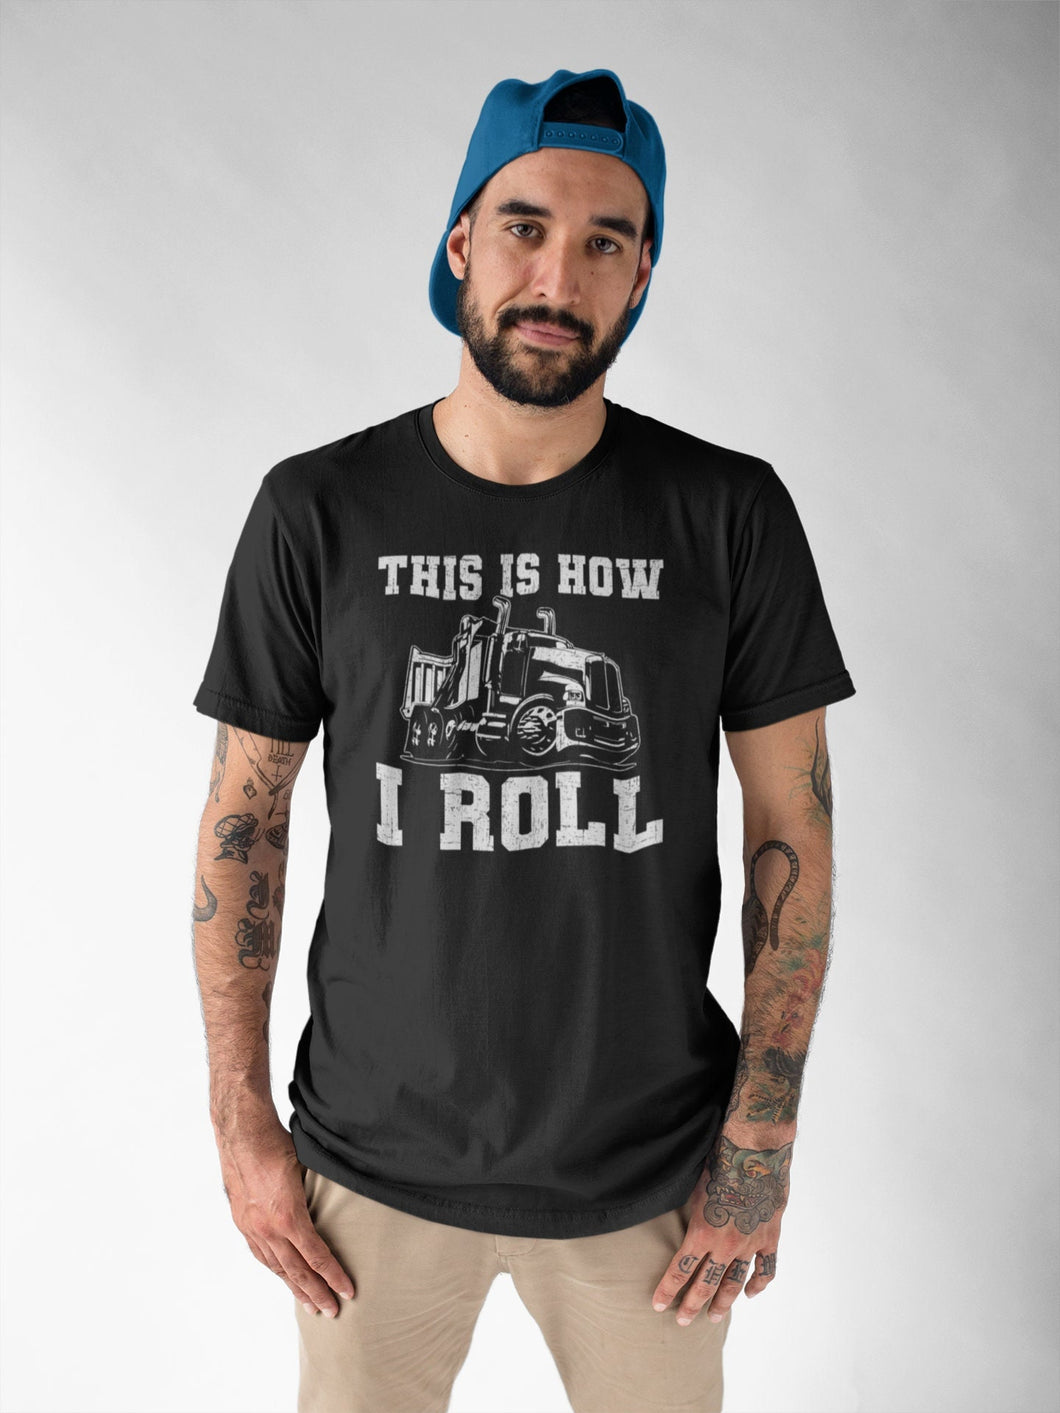 This Is How I Roll, Truck Driver Shirt, Trucker Lover Shirt, Trucking Gift, Truckers Gift